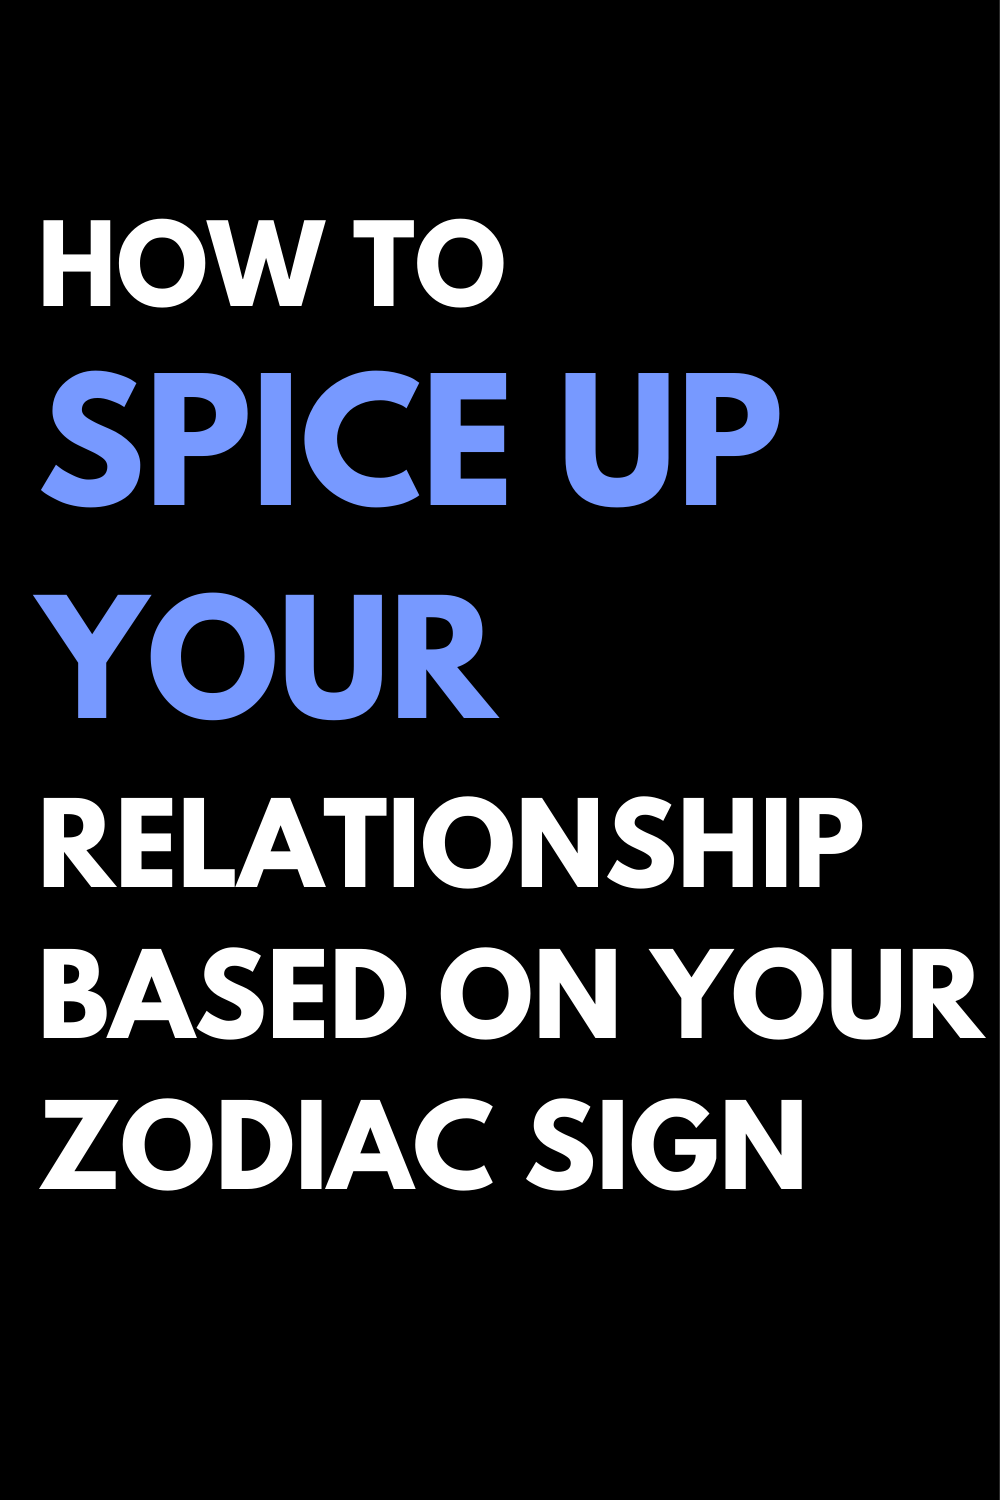 How To Spice Up Your Relationship Based On Your Zodiac Sign